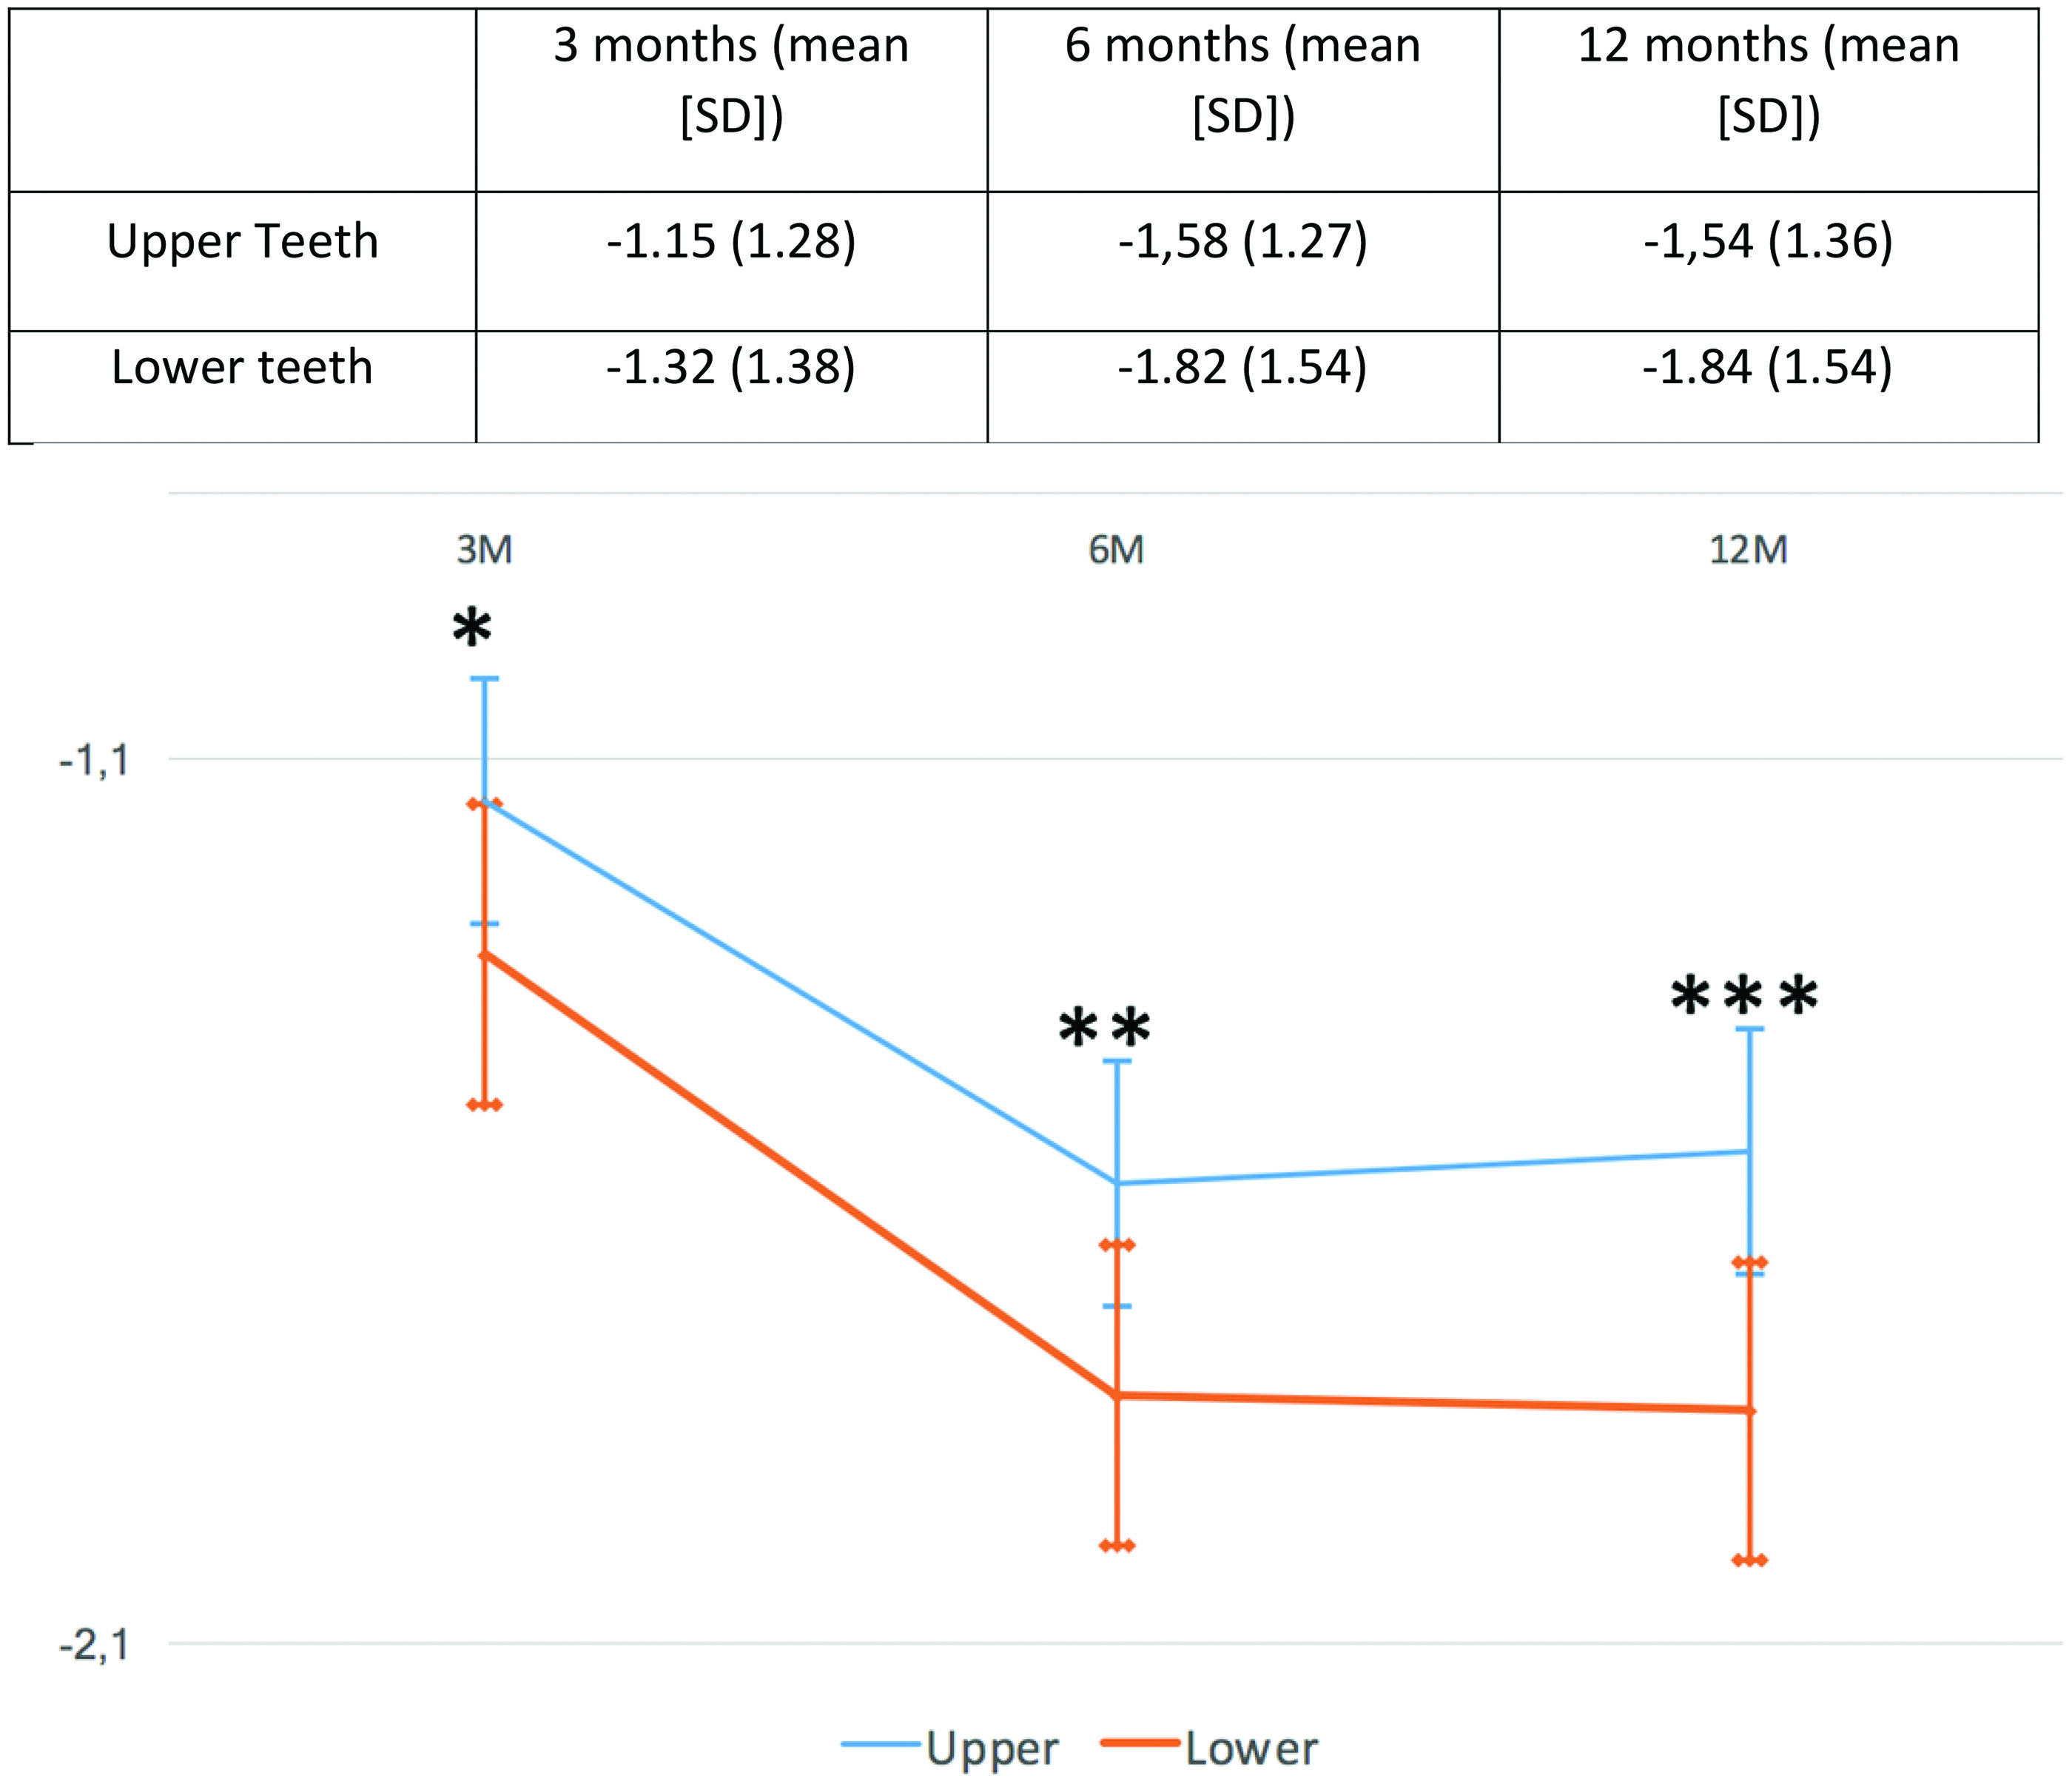 Figure 1. CAL levels variation at 3, 6 and 12 months' follow-up of non-surgical periodontal treatment. *P < 0.05, **P < 0.01, ***P < 0.001. SD: Standard Deviation; 3M: 3 months; 6M: 6 months; 12M: 12 months.